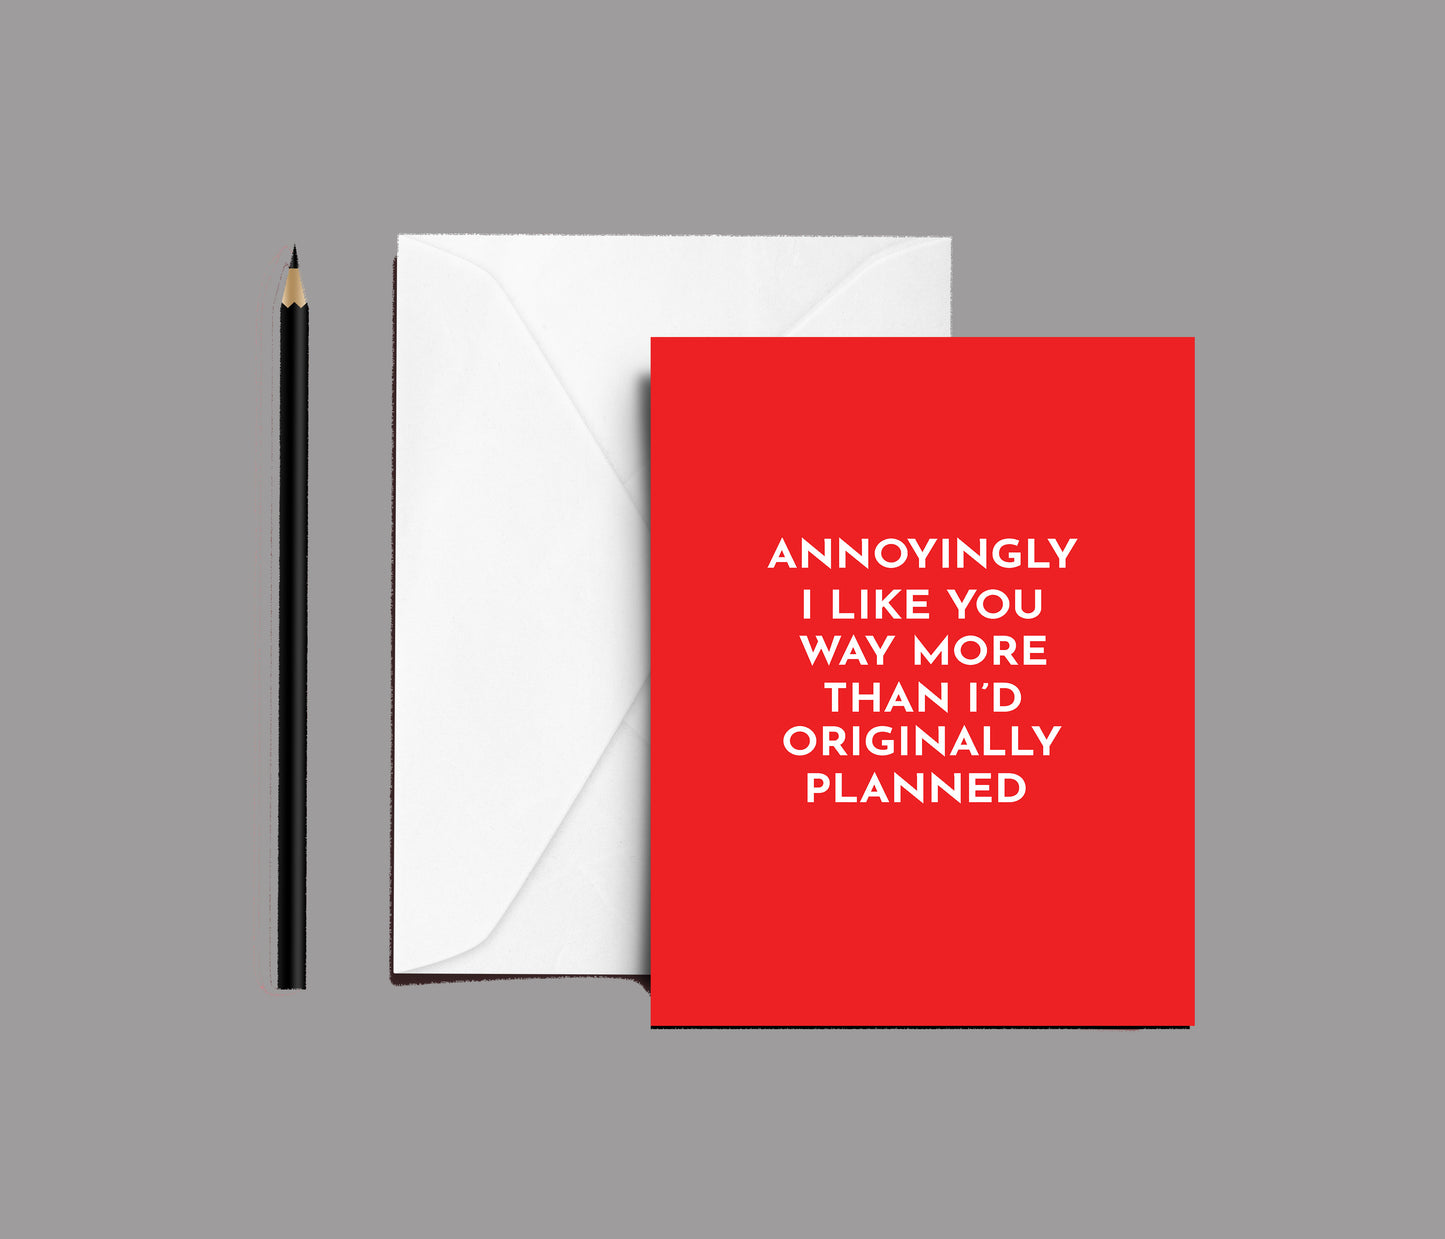 Annoyingly I like you way more then I planned  Funny romantic inappropriate gift card auckland, NZmade by nofilterco 12